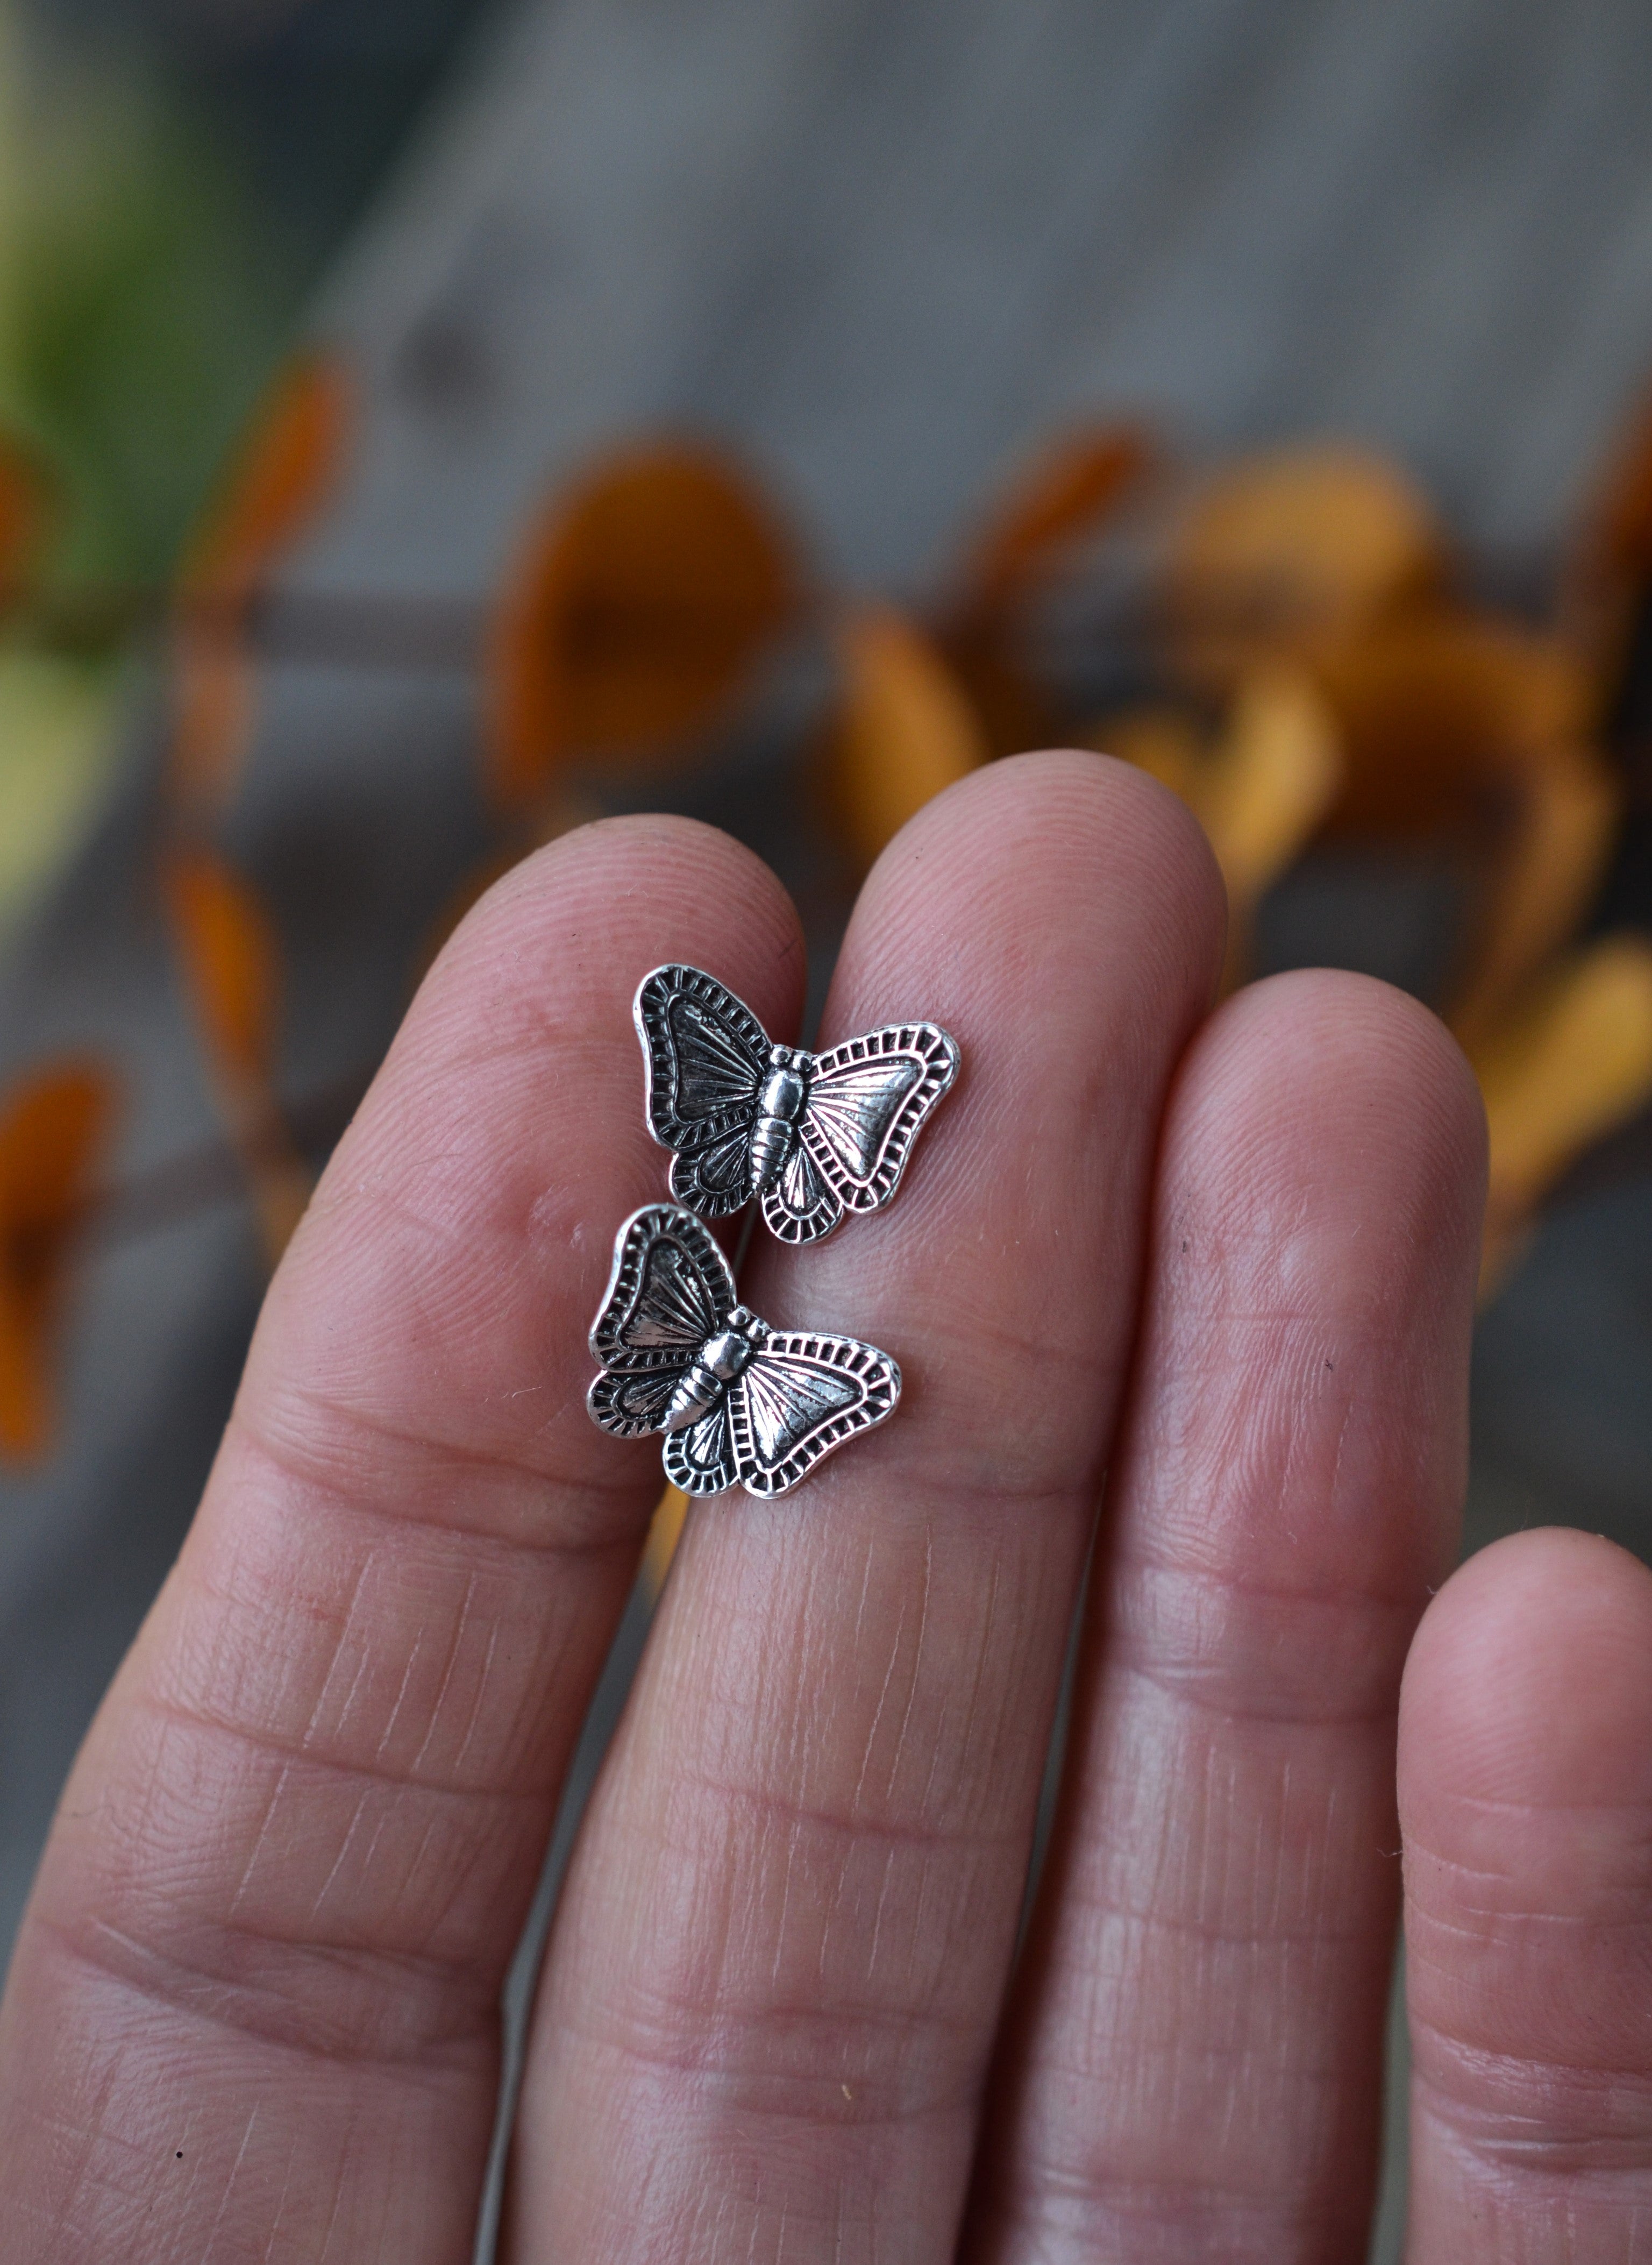 Only 2 pairs left! Stamped Butterfly Earrings - Sterling Silver